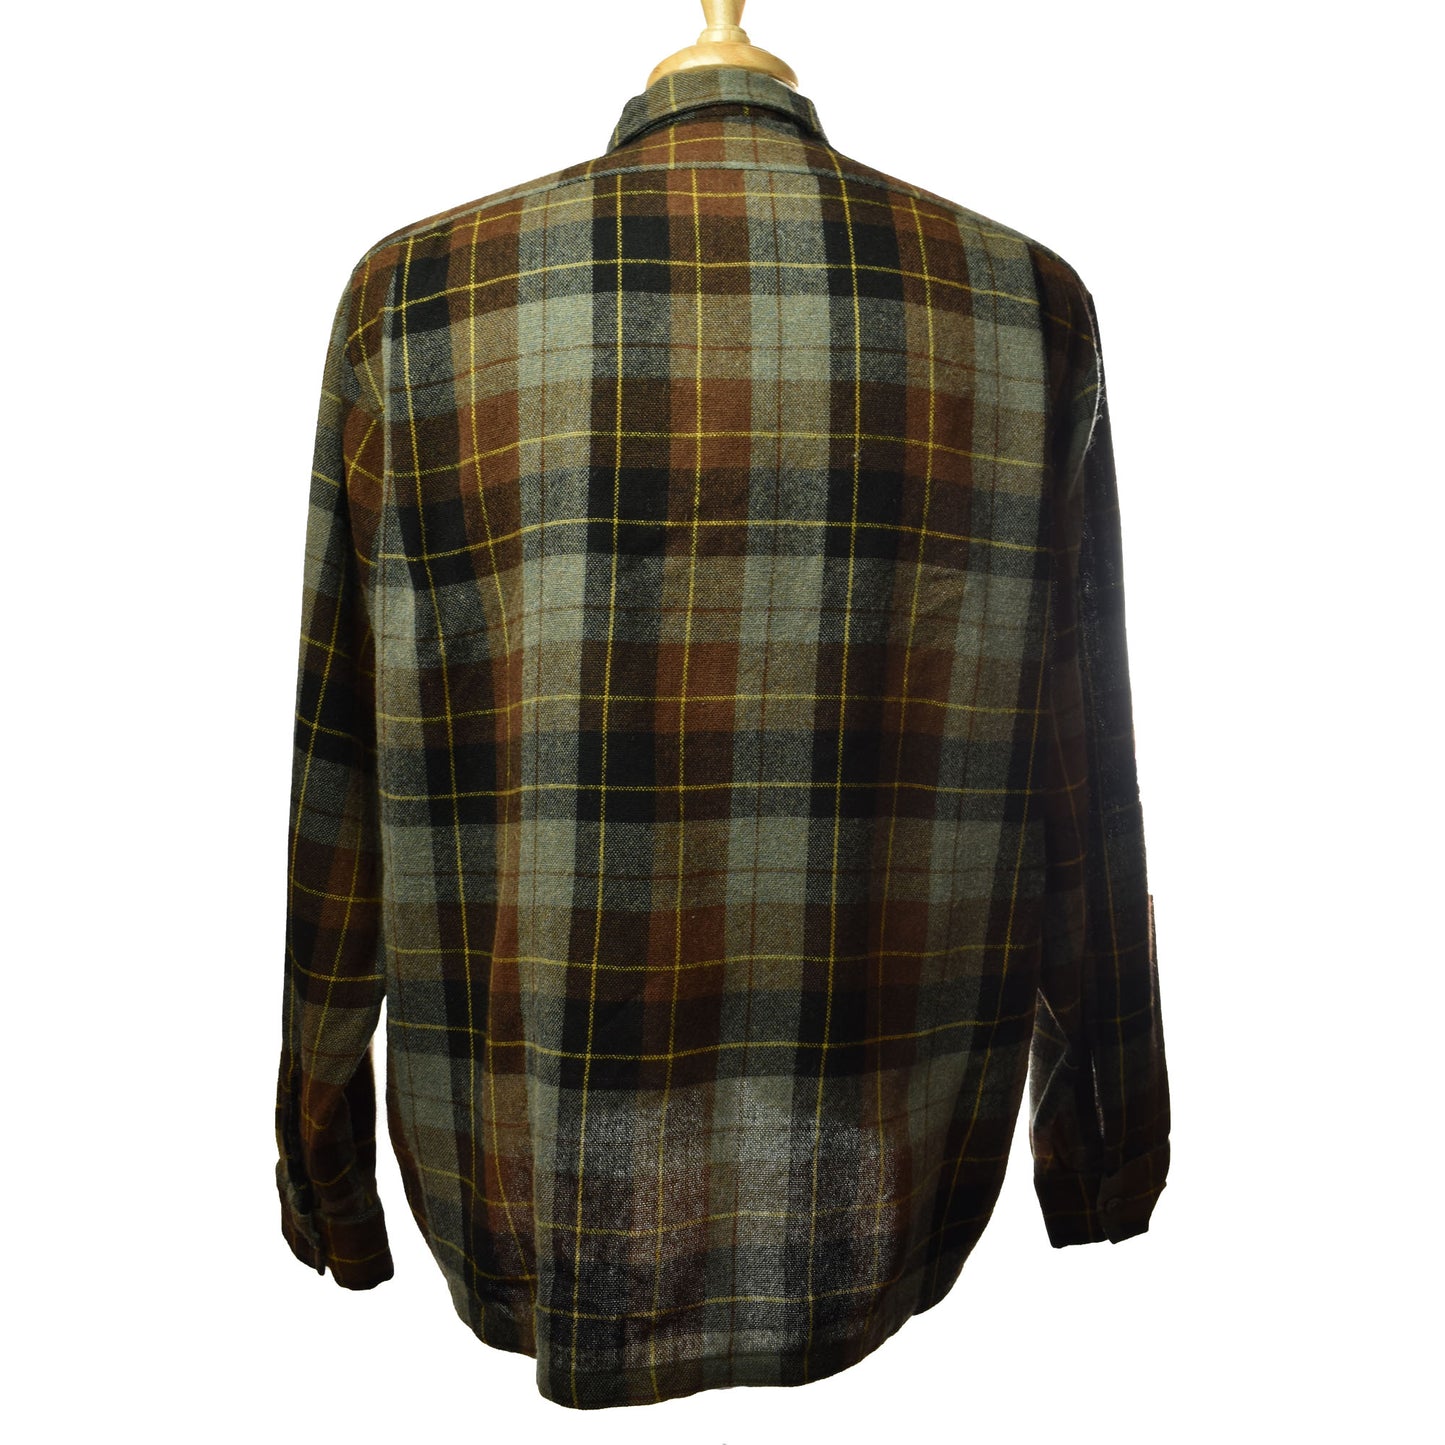 Vintage 50s 60s Tailored by McGregor Wool/Rayon Blend Flannel Shirt